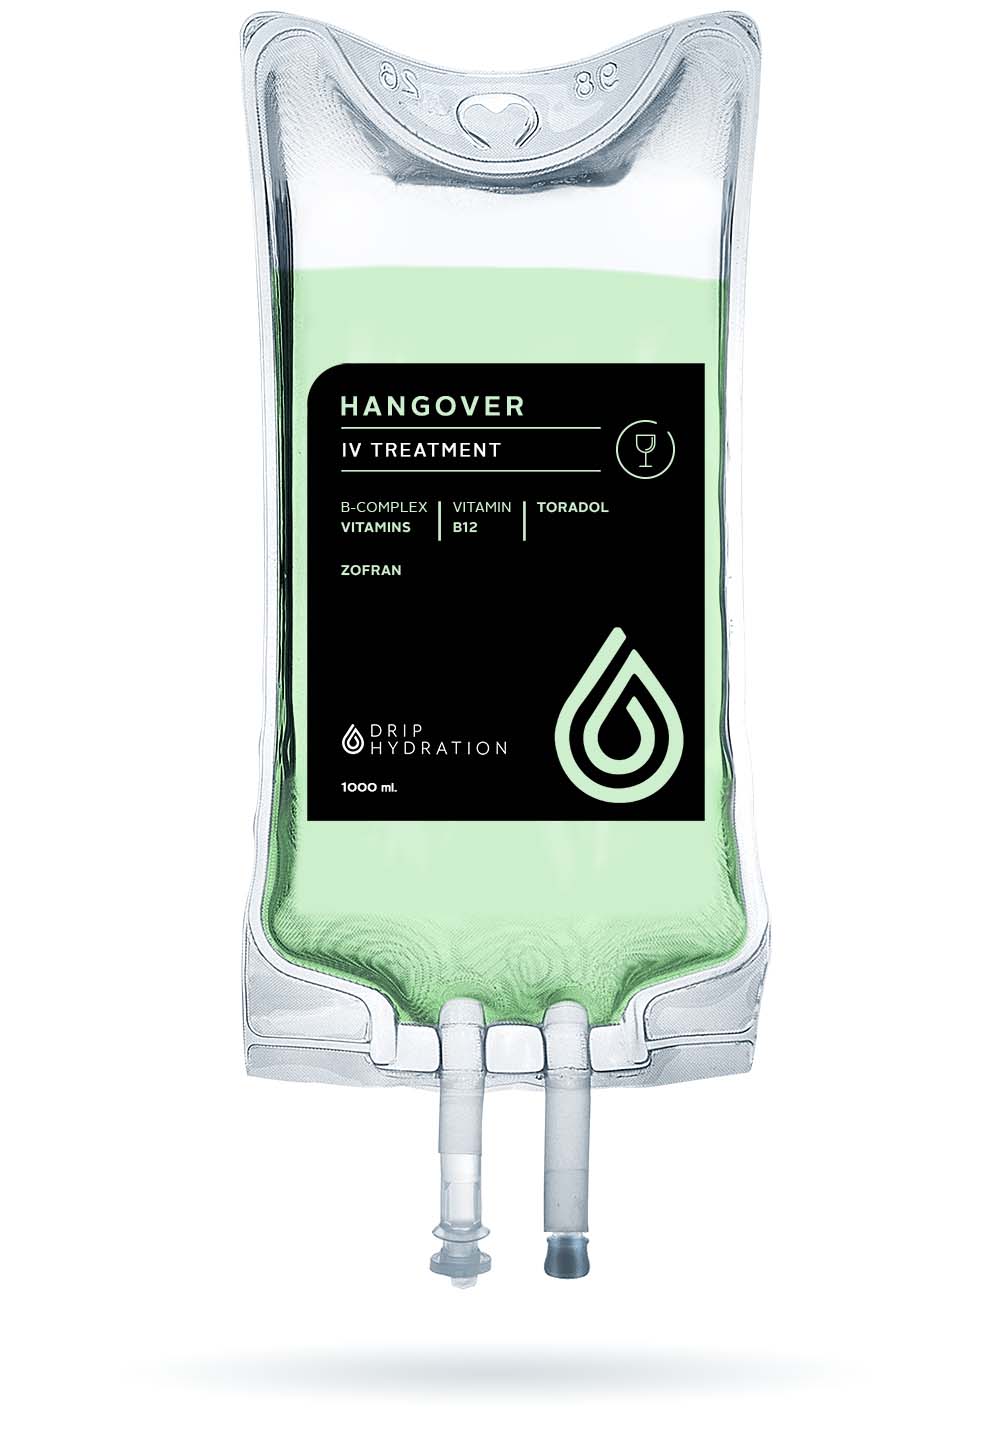 Drip Hydration's hangover iv treatment bag - graphic.